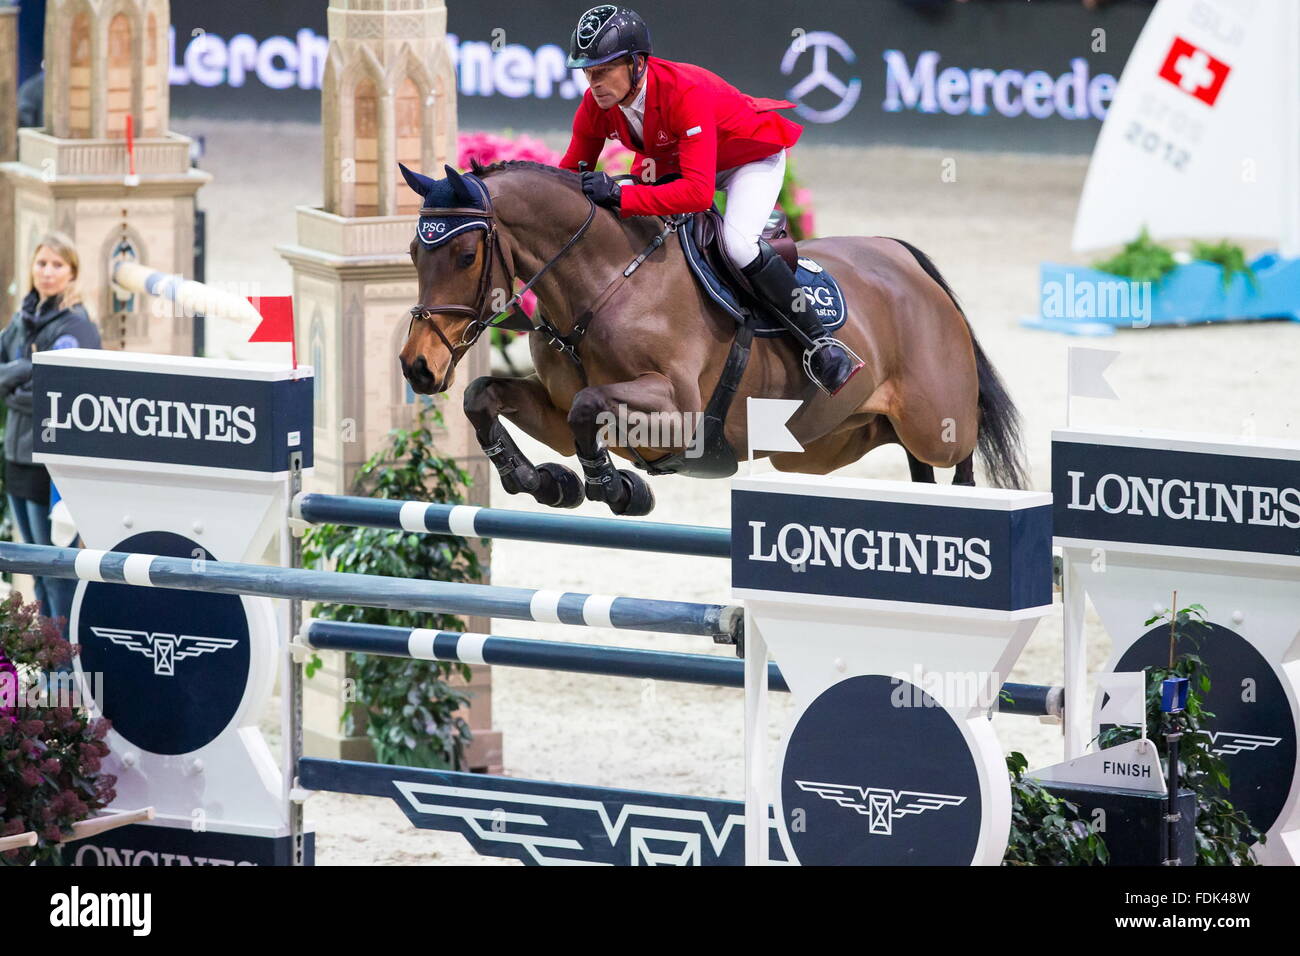 (160201) -- ZURICH, Feb. 1, 2016 (Xinhua) -- Swiss Pius Schwizer competes at the Longines FEI World Cup Jumping Western European League in Zurich, Switzerland, on Jan. 31, 2016. Pius Schwizer claimed the champion. (Xinhua/FEI/Tony Parkes) Stock Photo